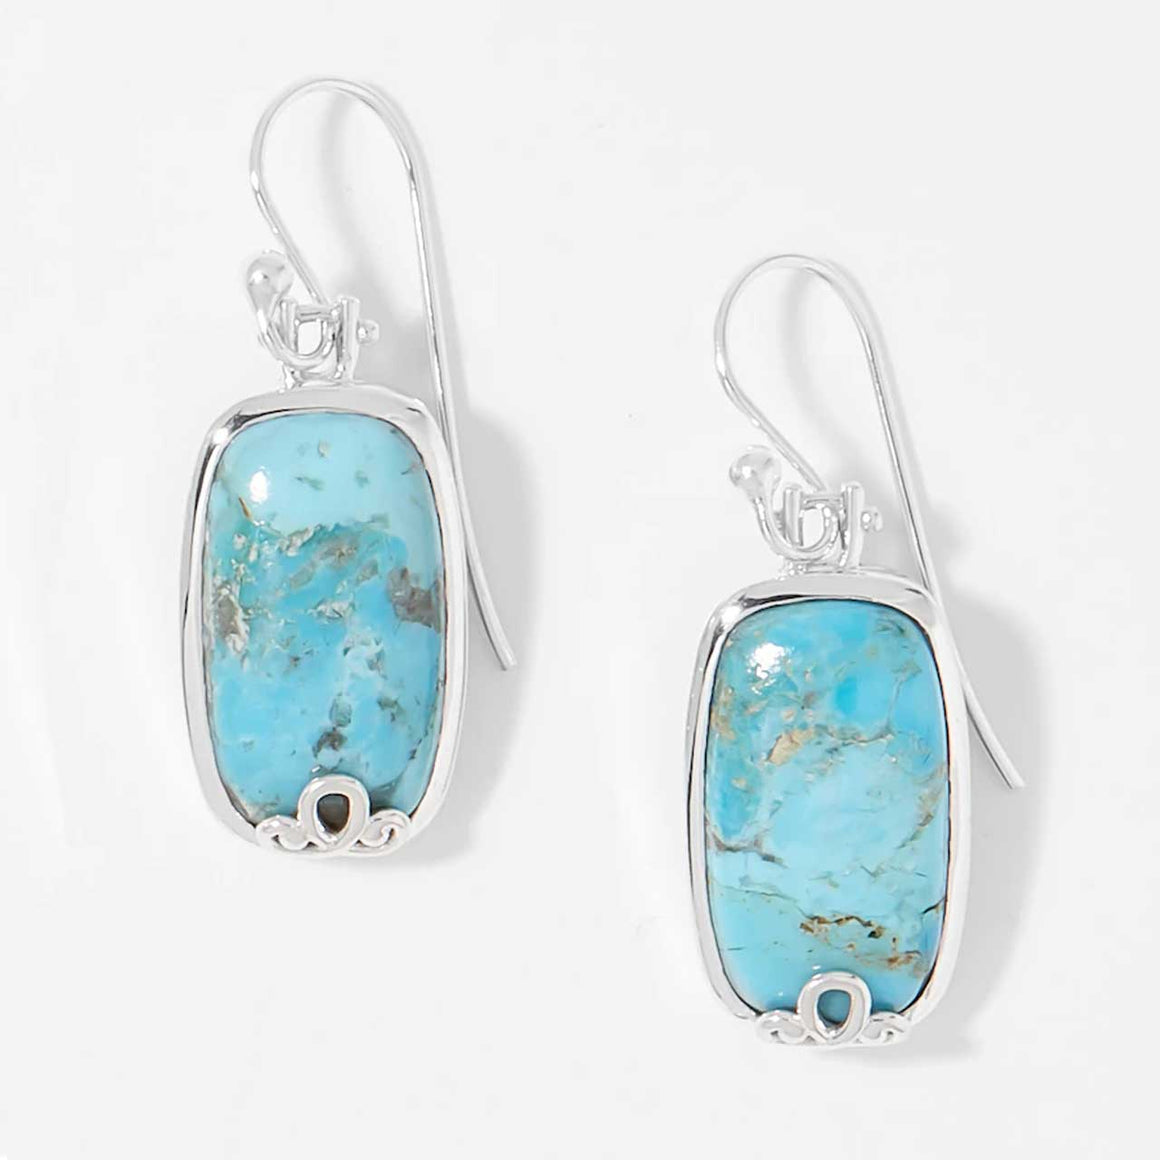 Mohave Turquoise Earrings